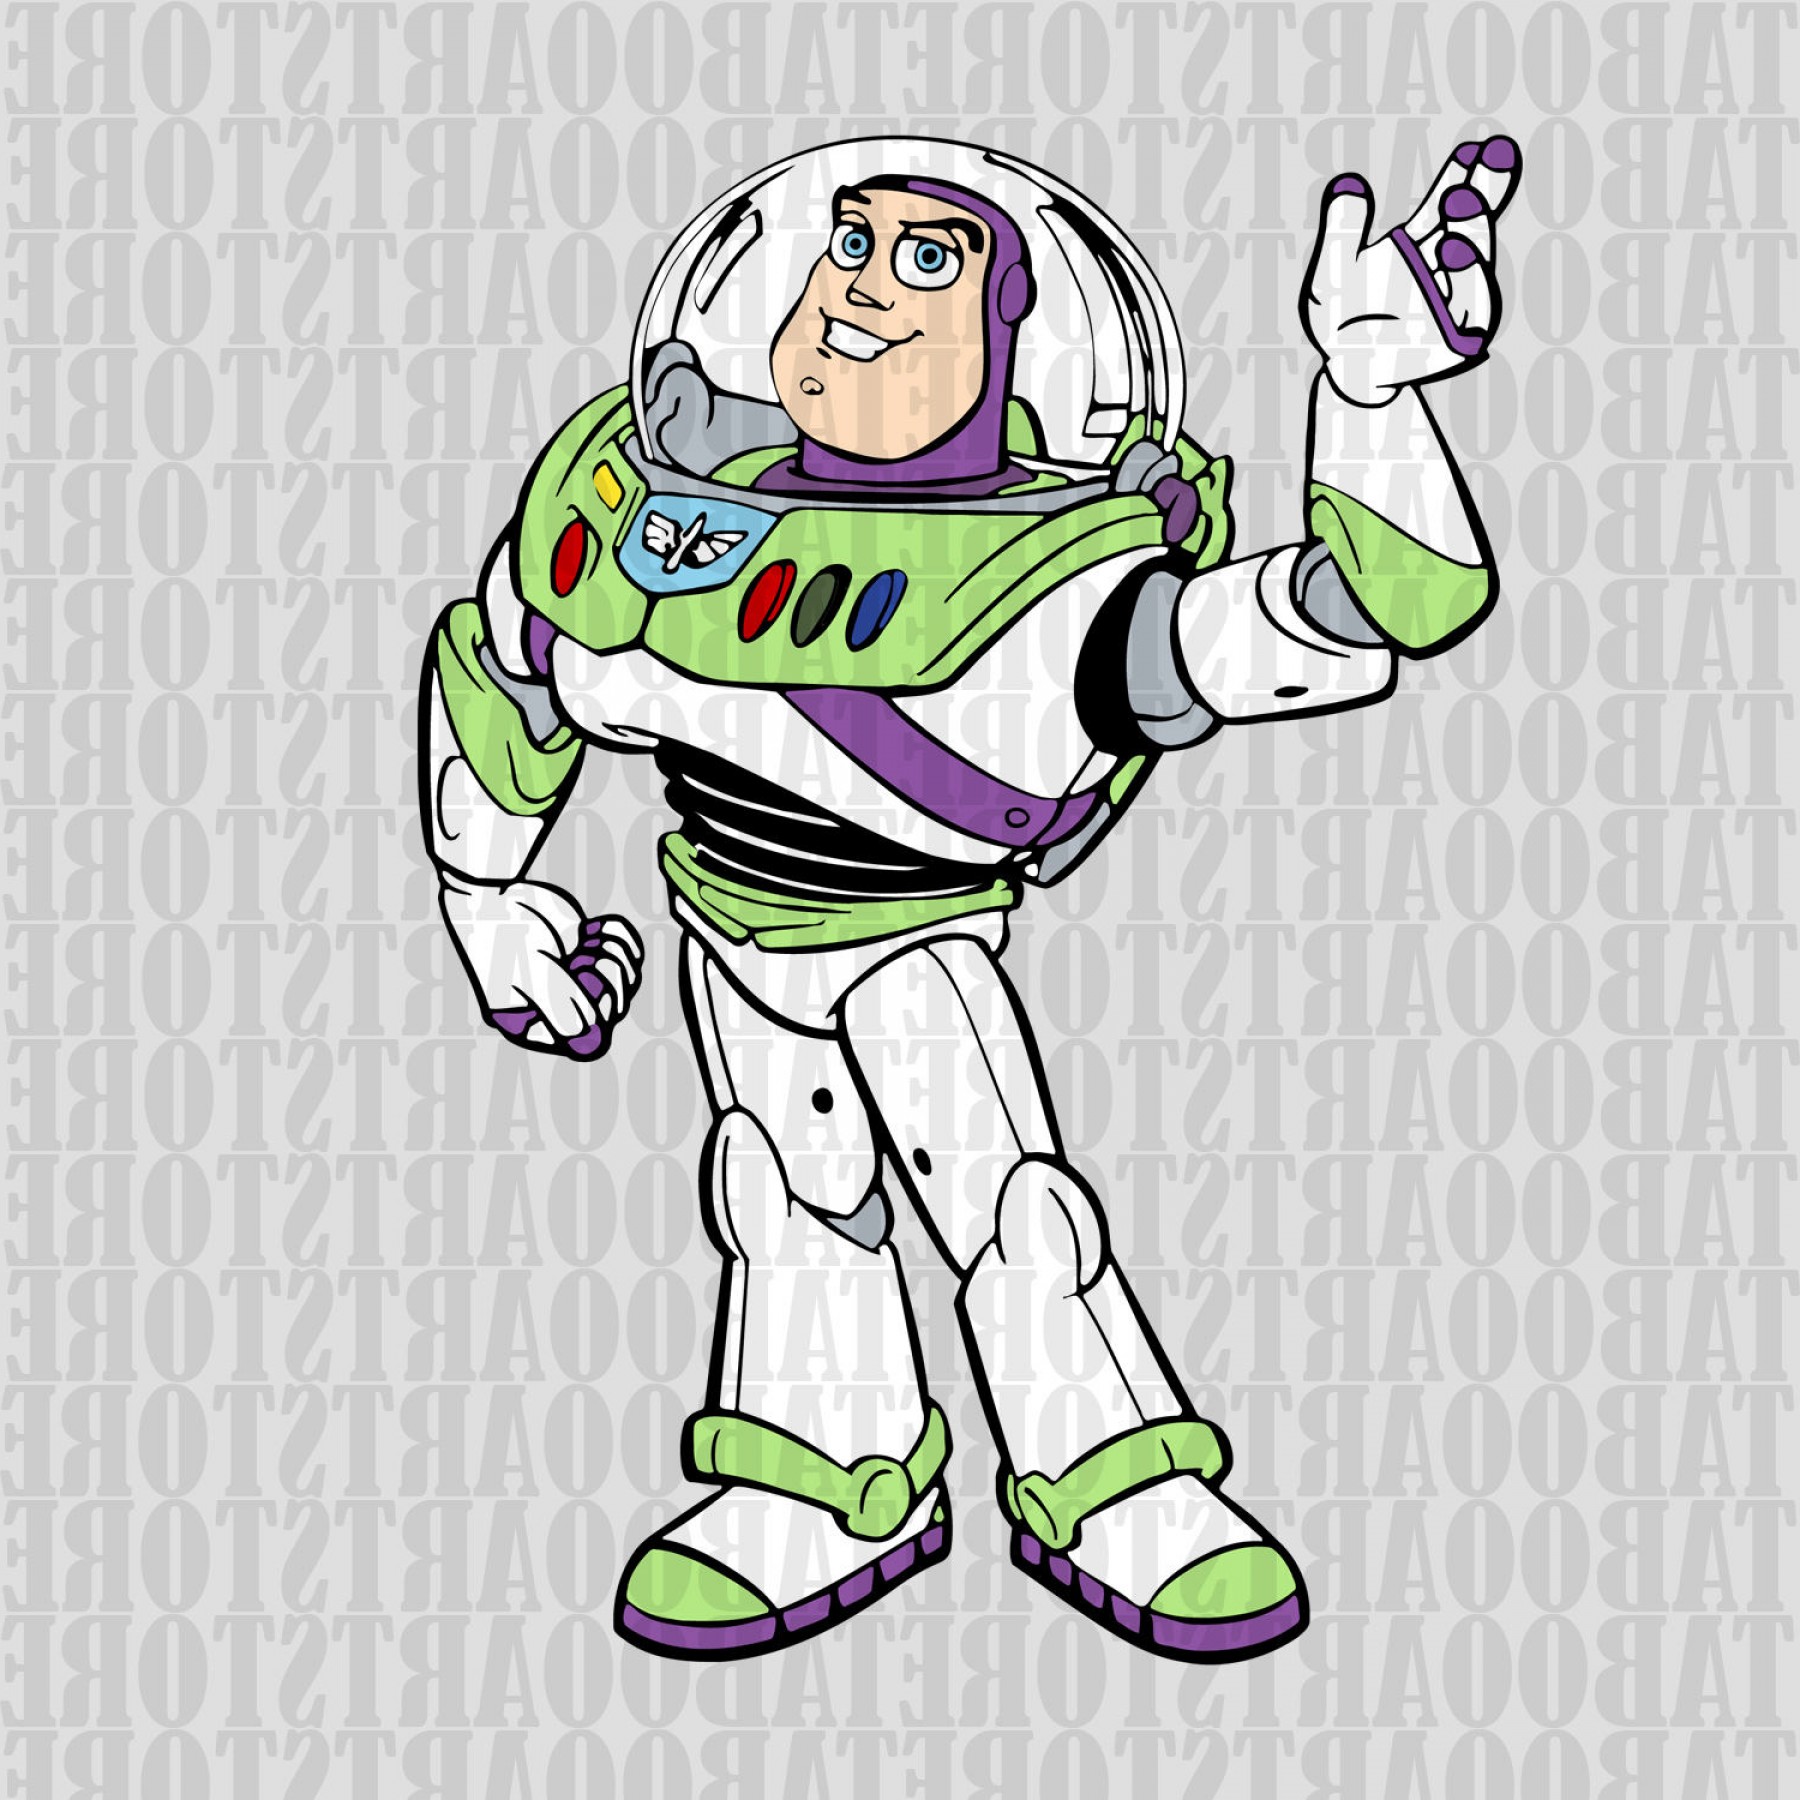 Vector Images for 'Buzz lightyear'. 